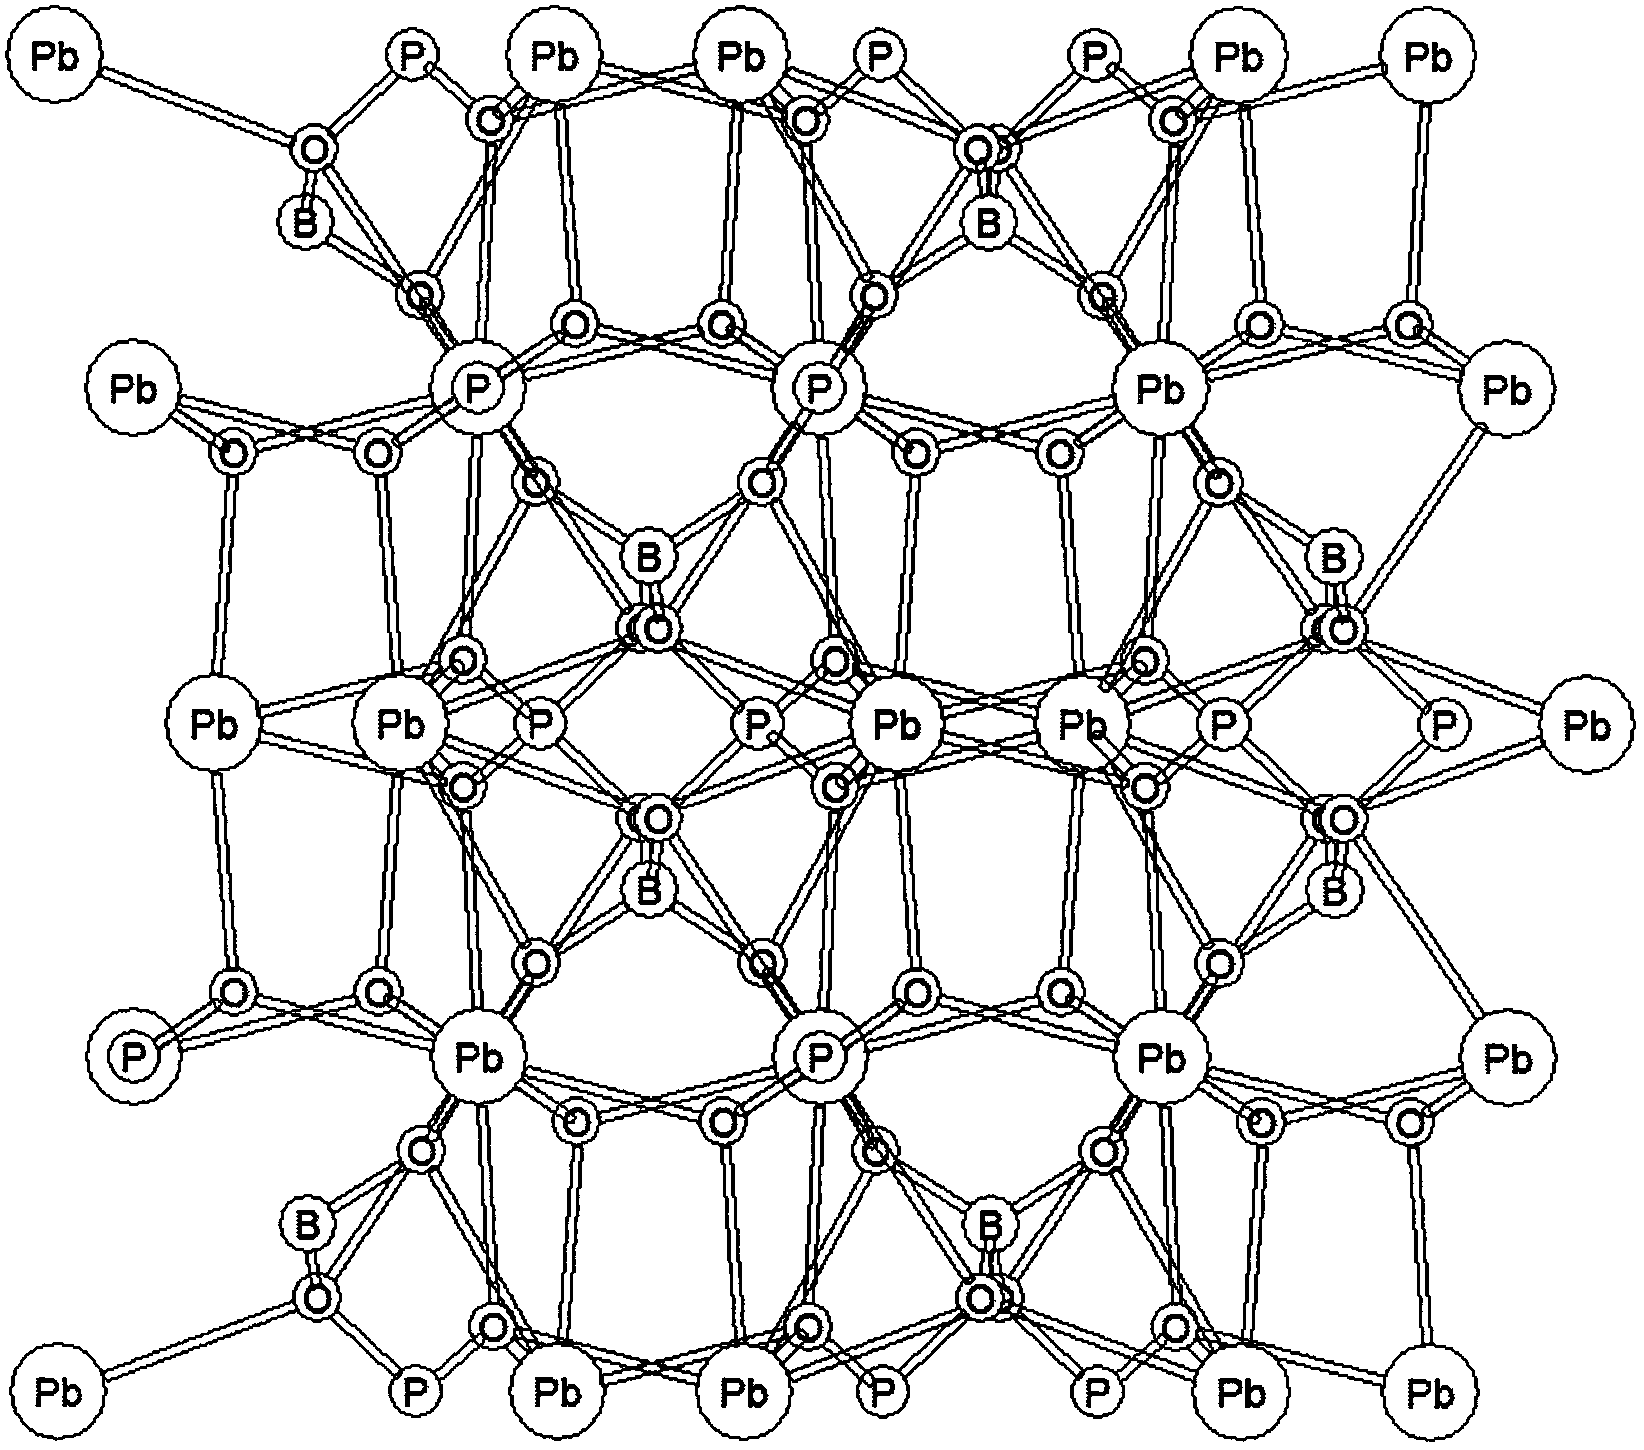 Compound lead rubidium borophosphate and non-linear optical crystal of lead rubidium borophosphate, preparation method and applications thereof